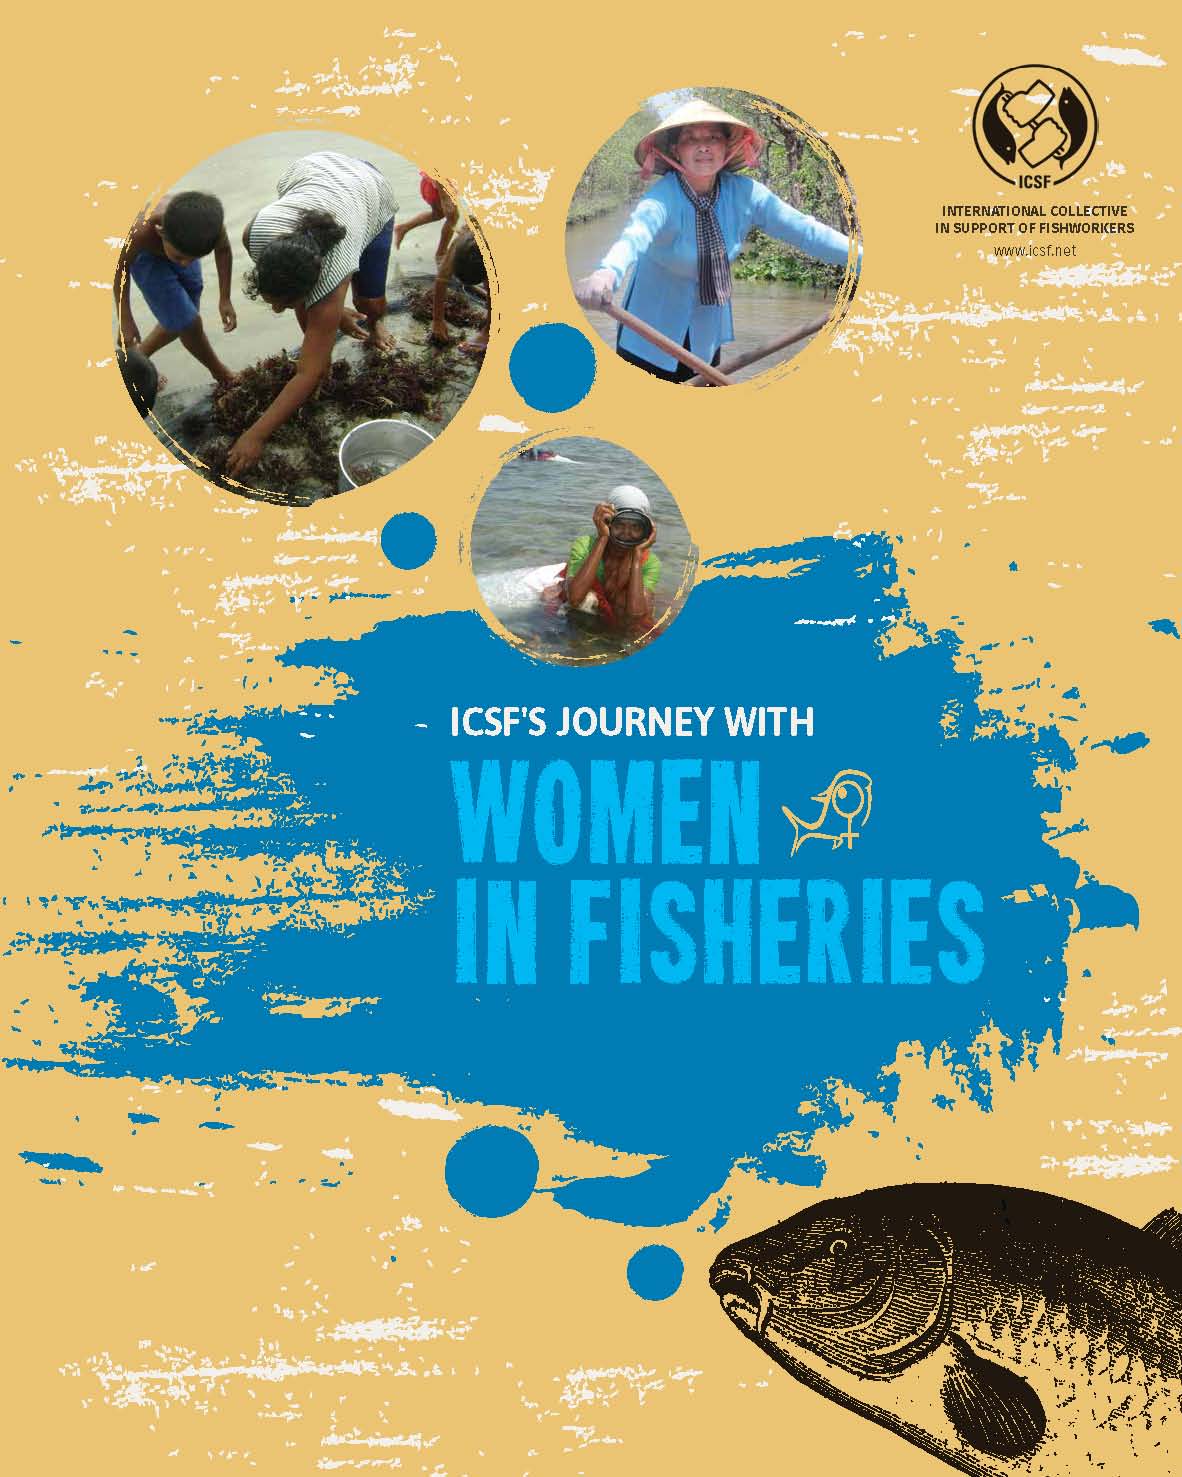 ICSF’s journey with Women in Fisheries